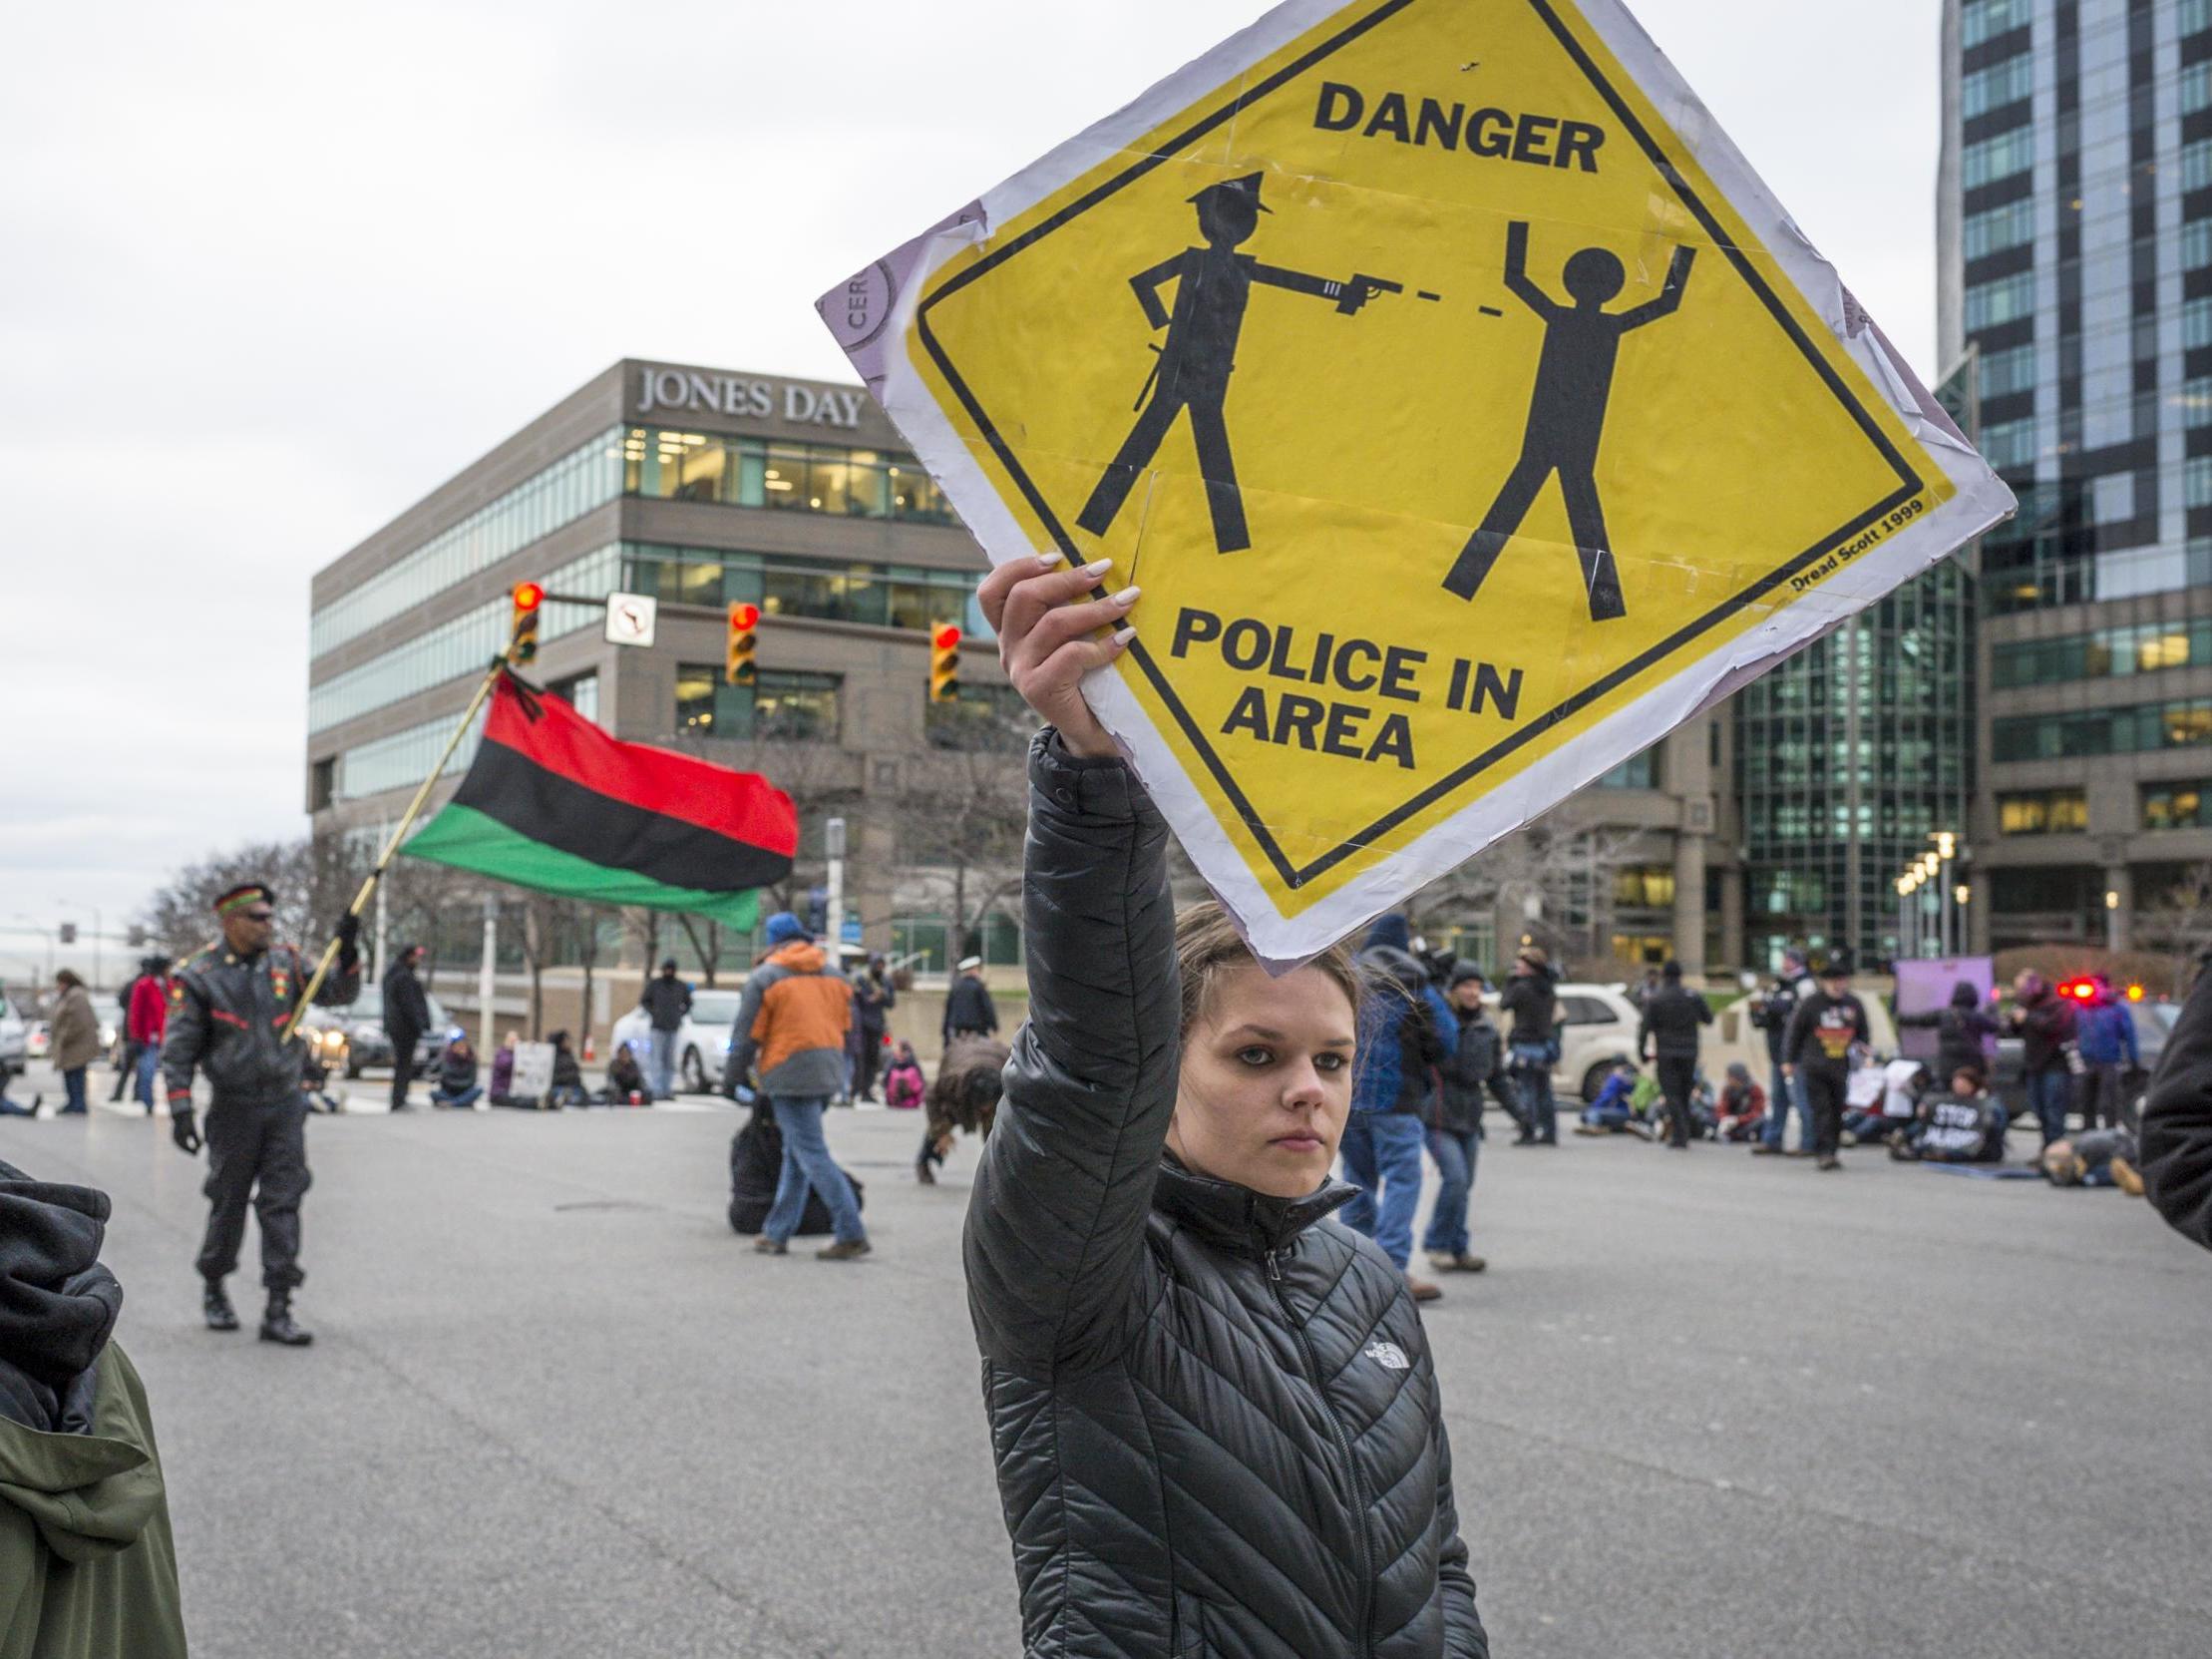 Protesters on the street the day after a grand jury declined to indict Cleveland Police officer Timothy Loehmann for the fatal shooting of Tamir Rice on 22 November 2014.